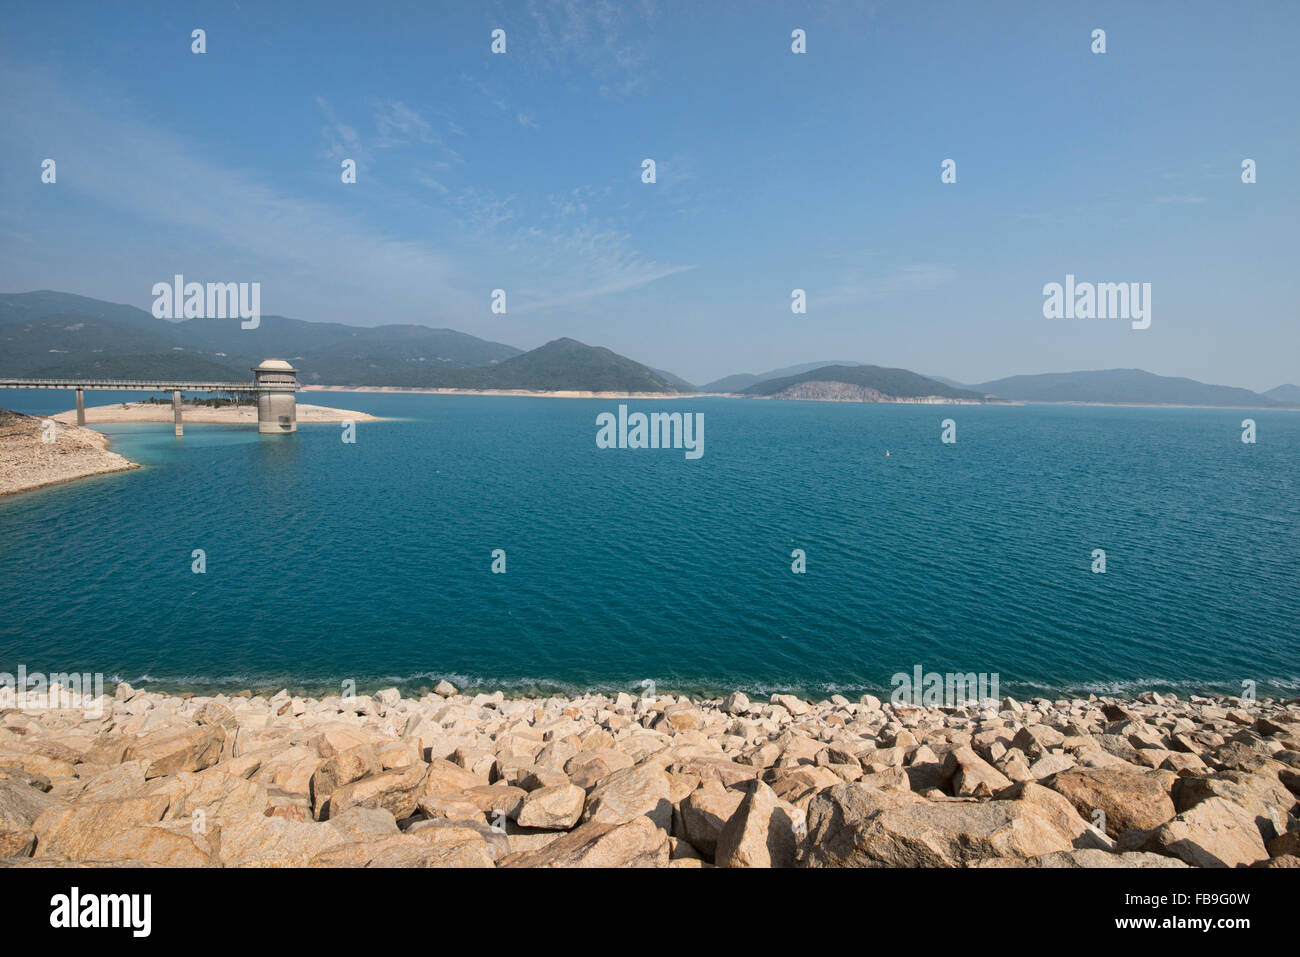 The view from the Geo Trail, High Island Reservoir, Sai Kung, Hong Kong Stock Photo